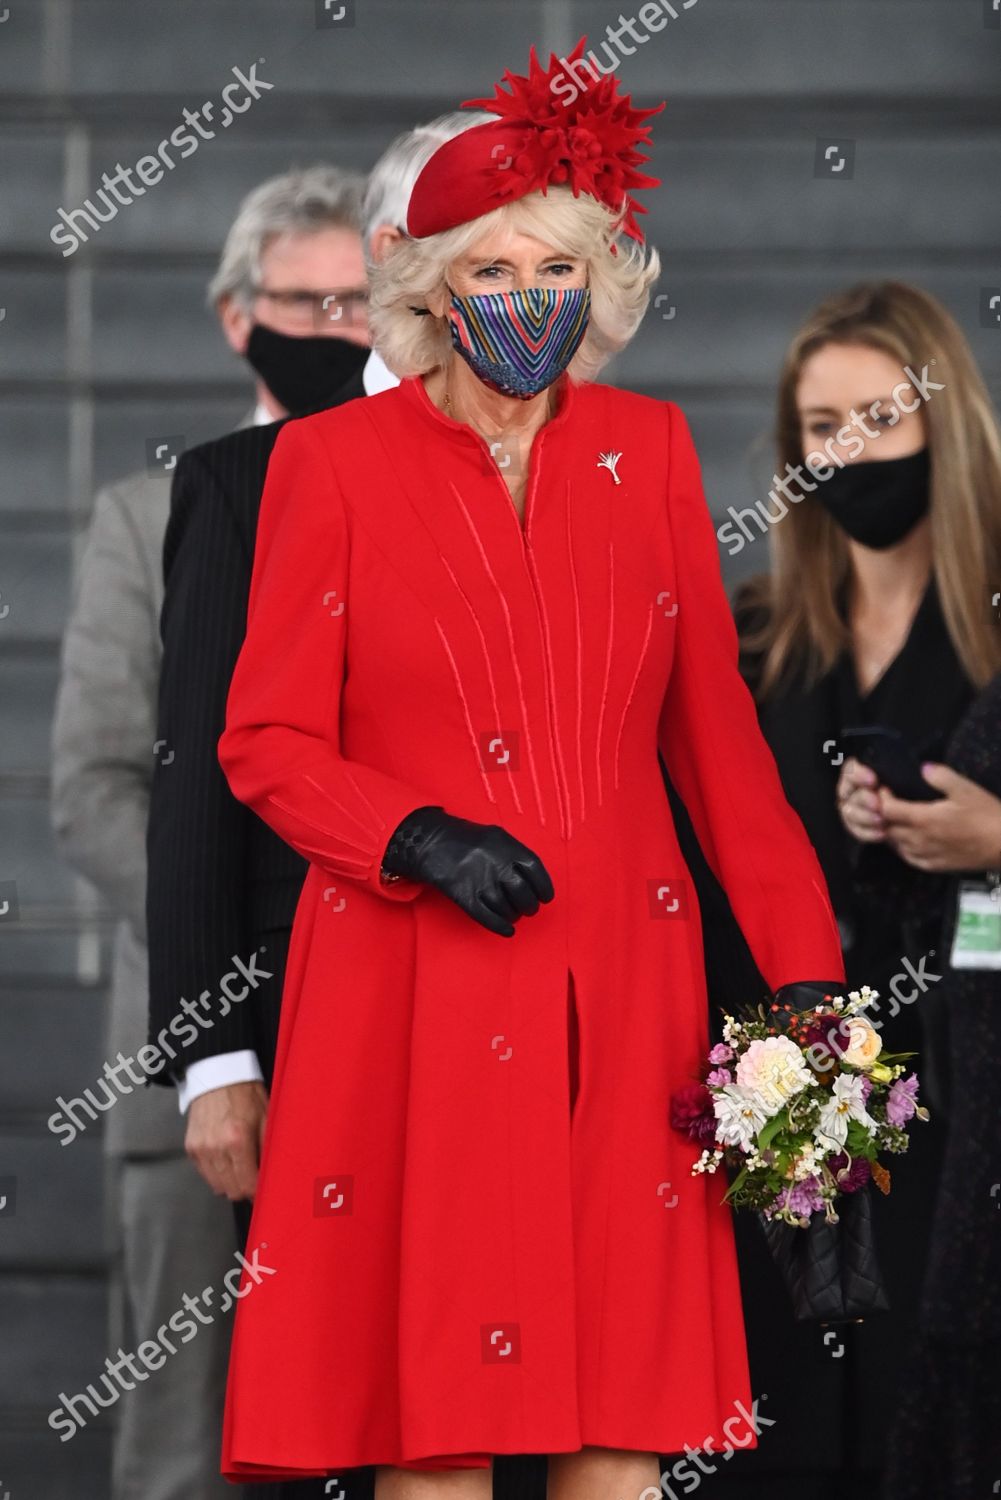 opening-ceremony-of-the-sixth-session-of-the-senedd-cardiff-wales-uk-shutterstock-editorial-12536982dm.jpg